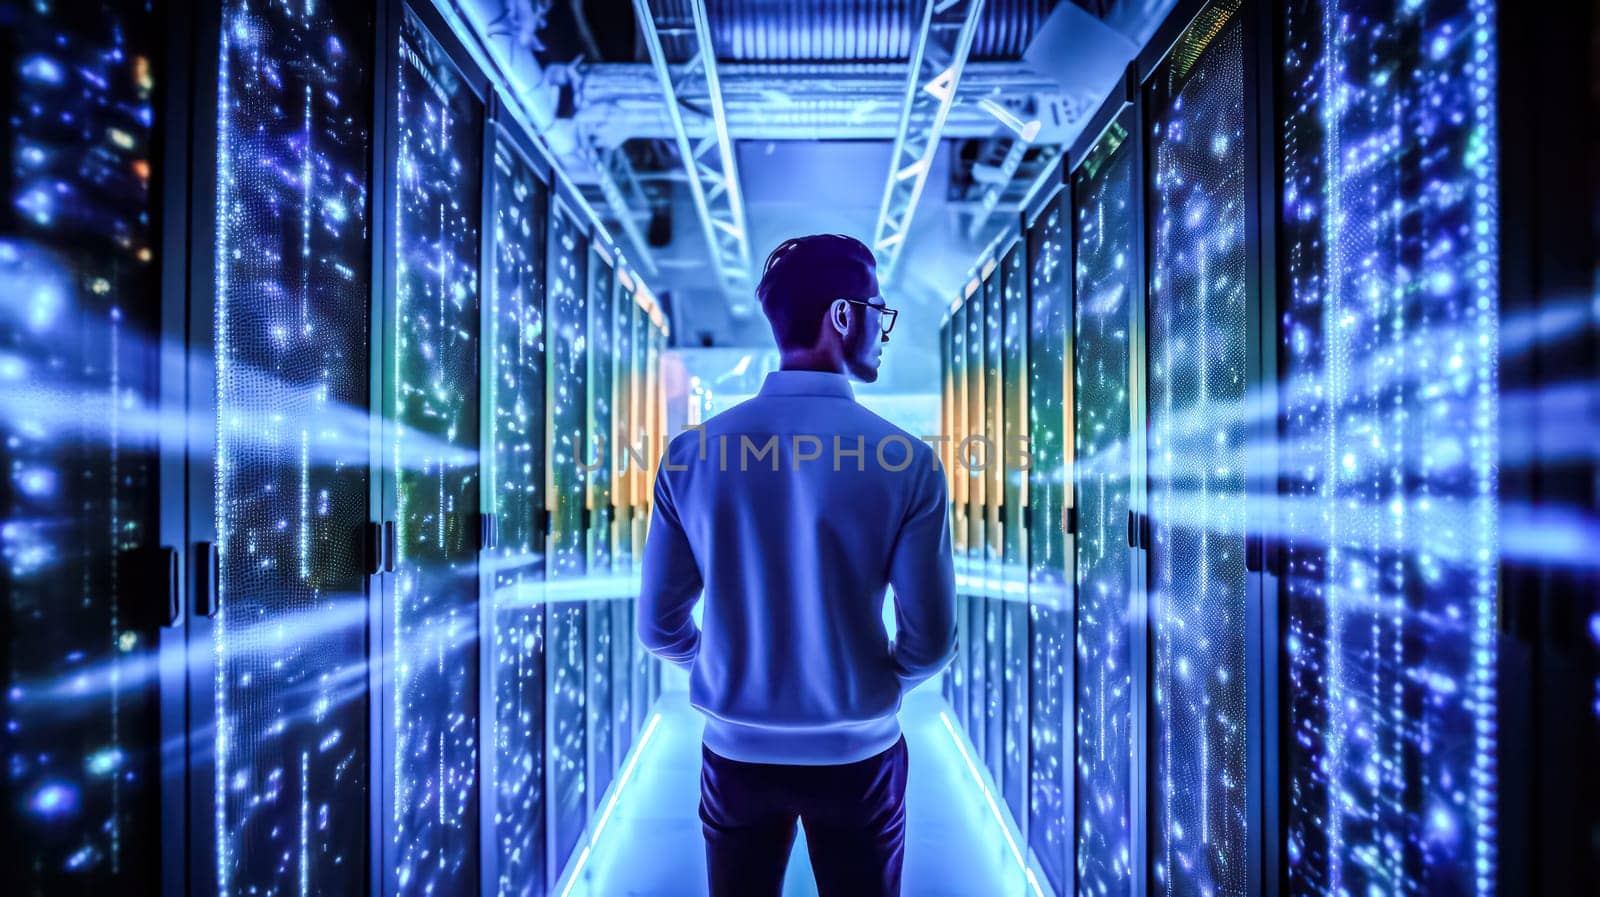 IT engineer walking through data center with rows of working rack servers standard illustration capturing the technical environment and expertise.